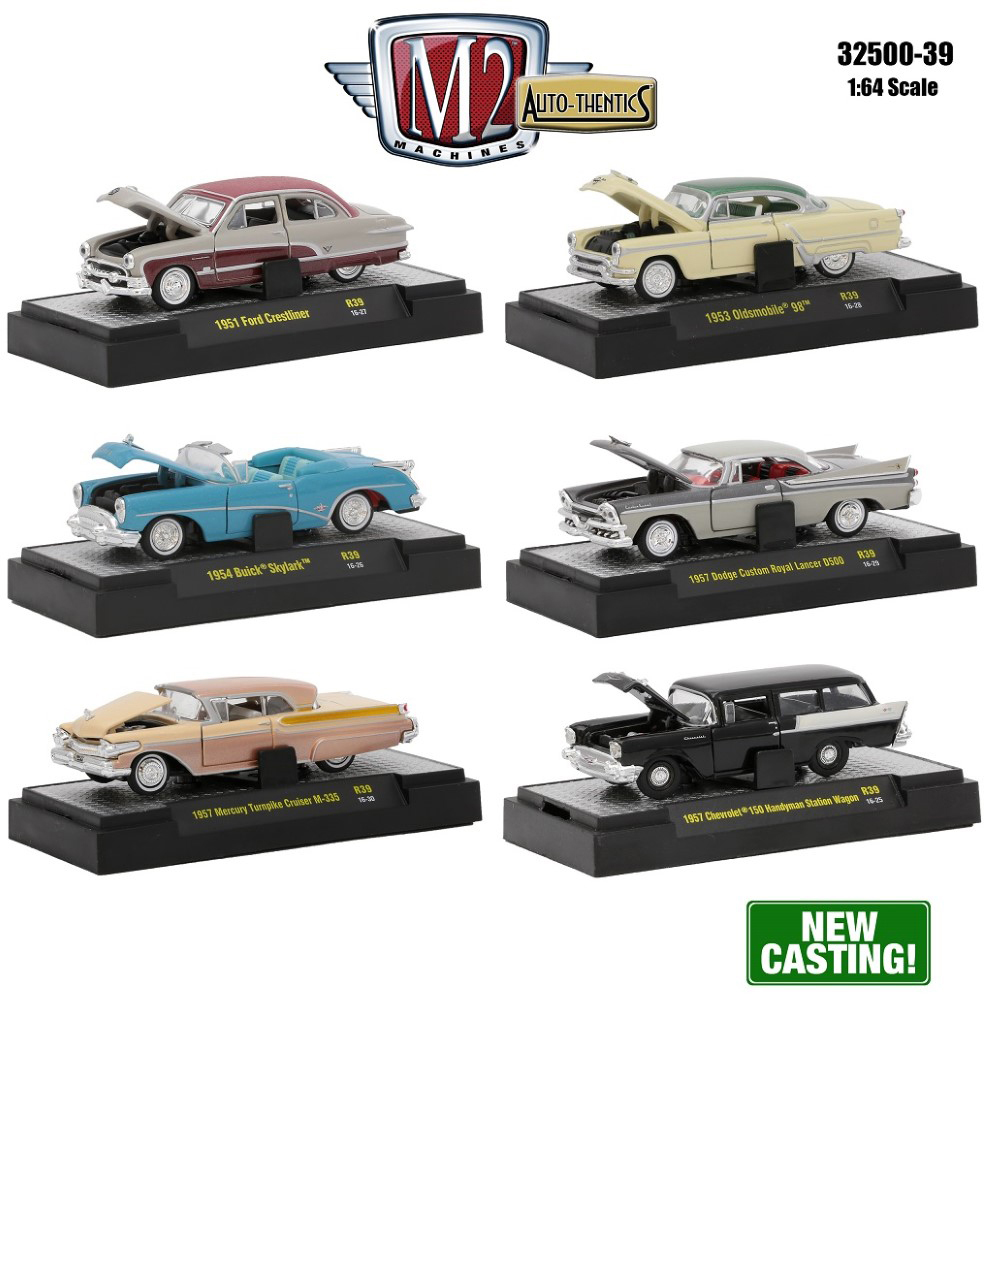 Auto Thentics 6 Piece Set Release 39 IN DISPLAY CASES 1/64 Diecast Model Cars by M2 Machines